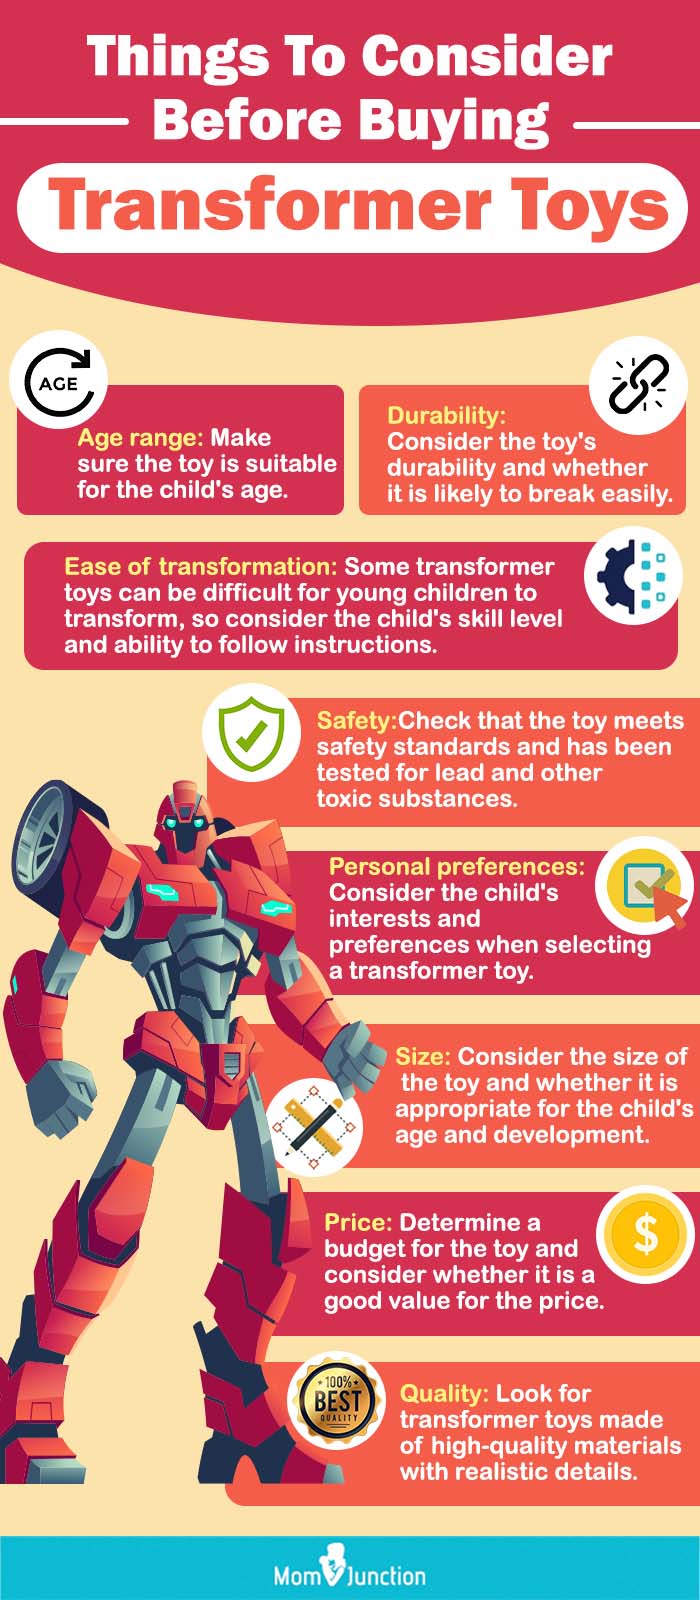 Things To Consider Before Buying Transformer Toys (infographic)